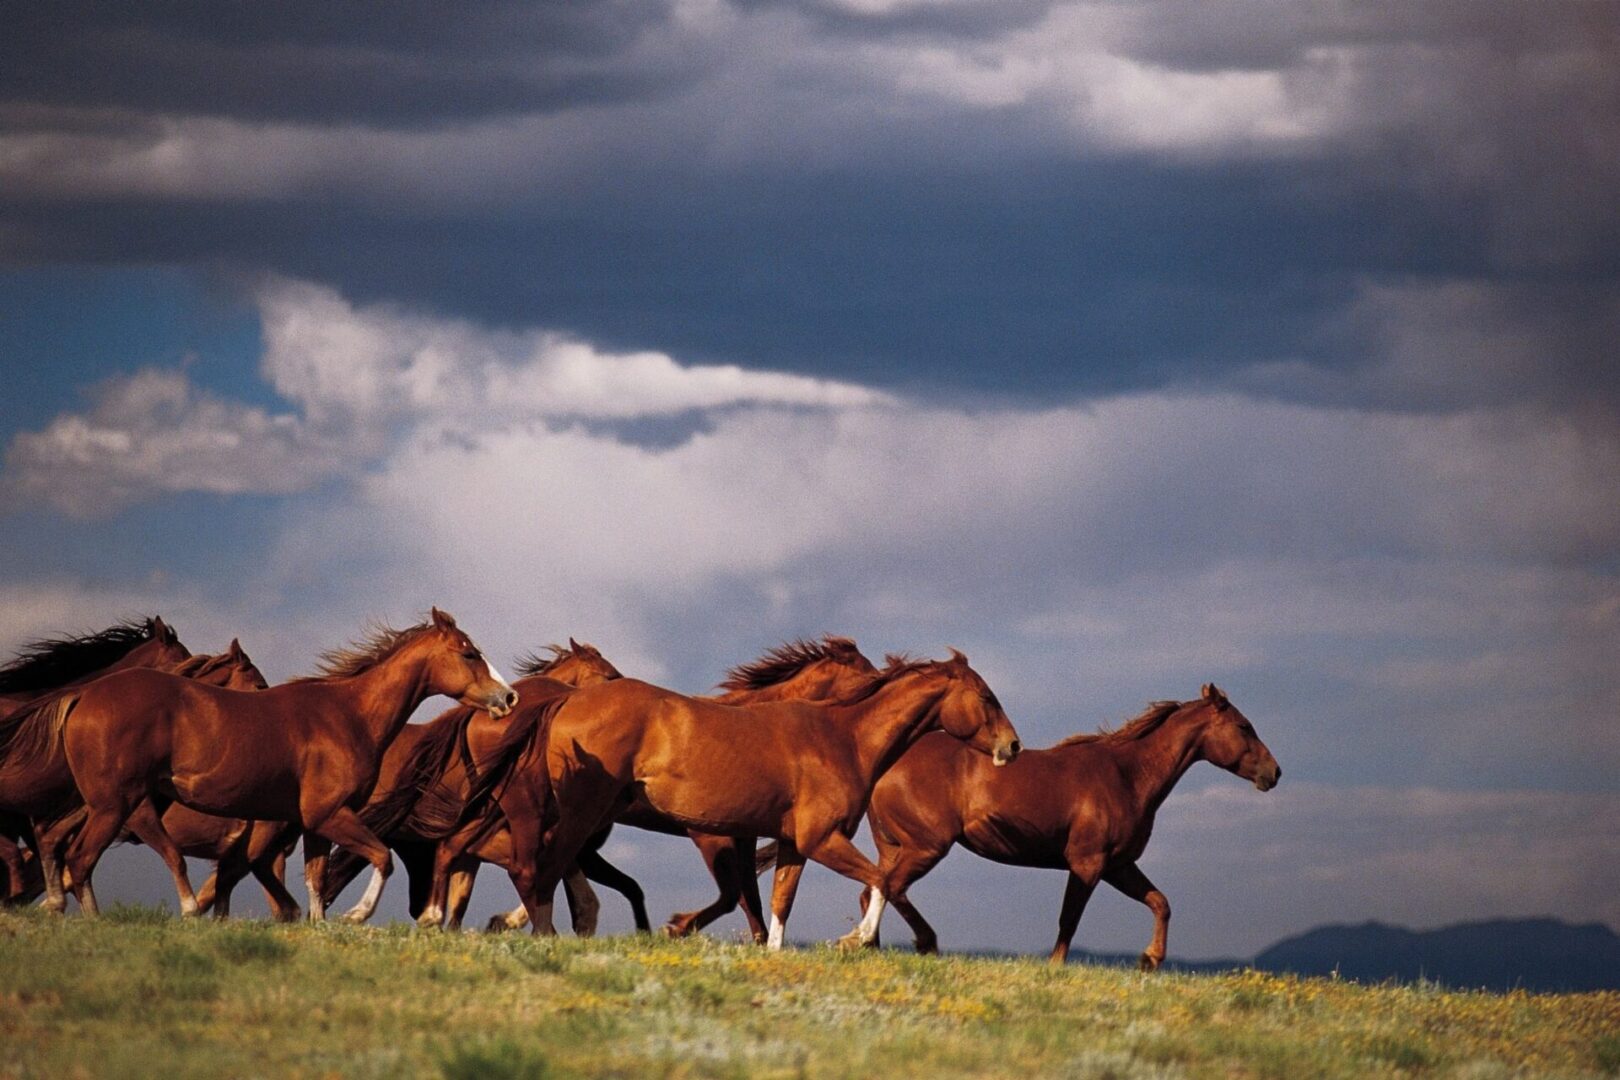 A group of horses running in the grass.